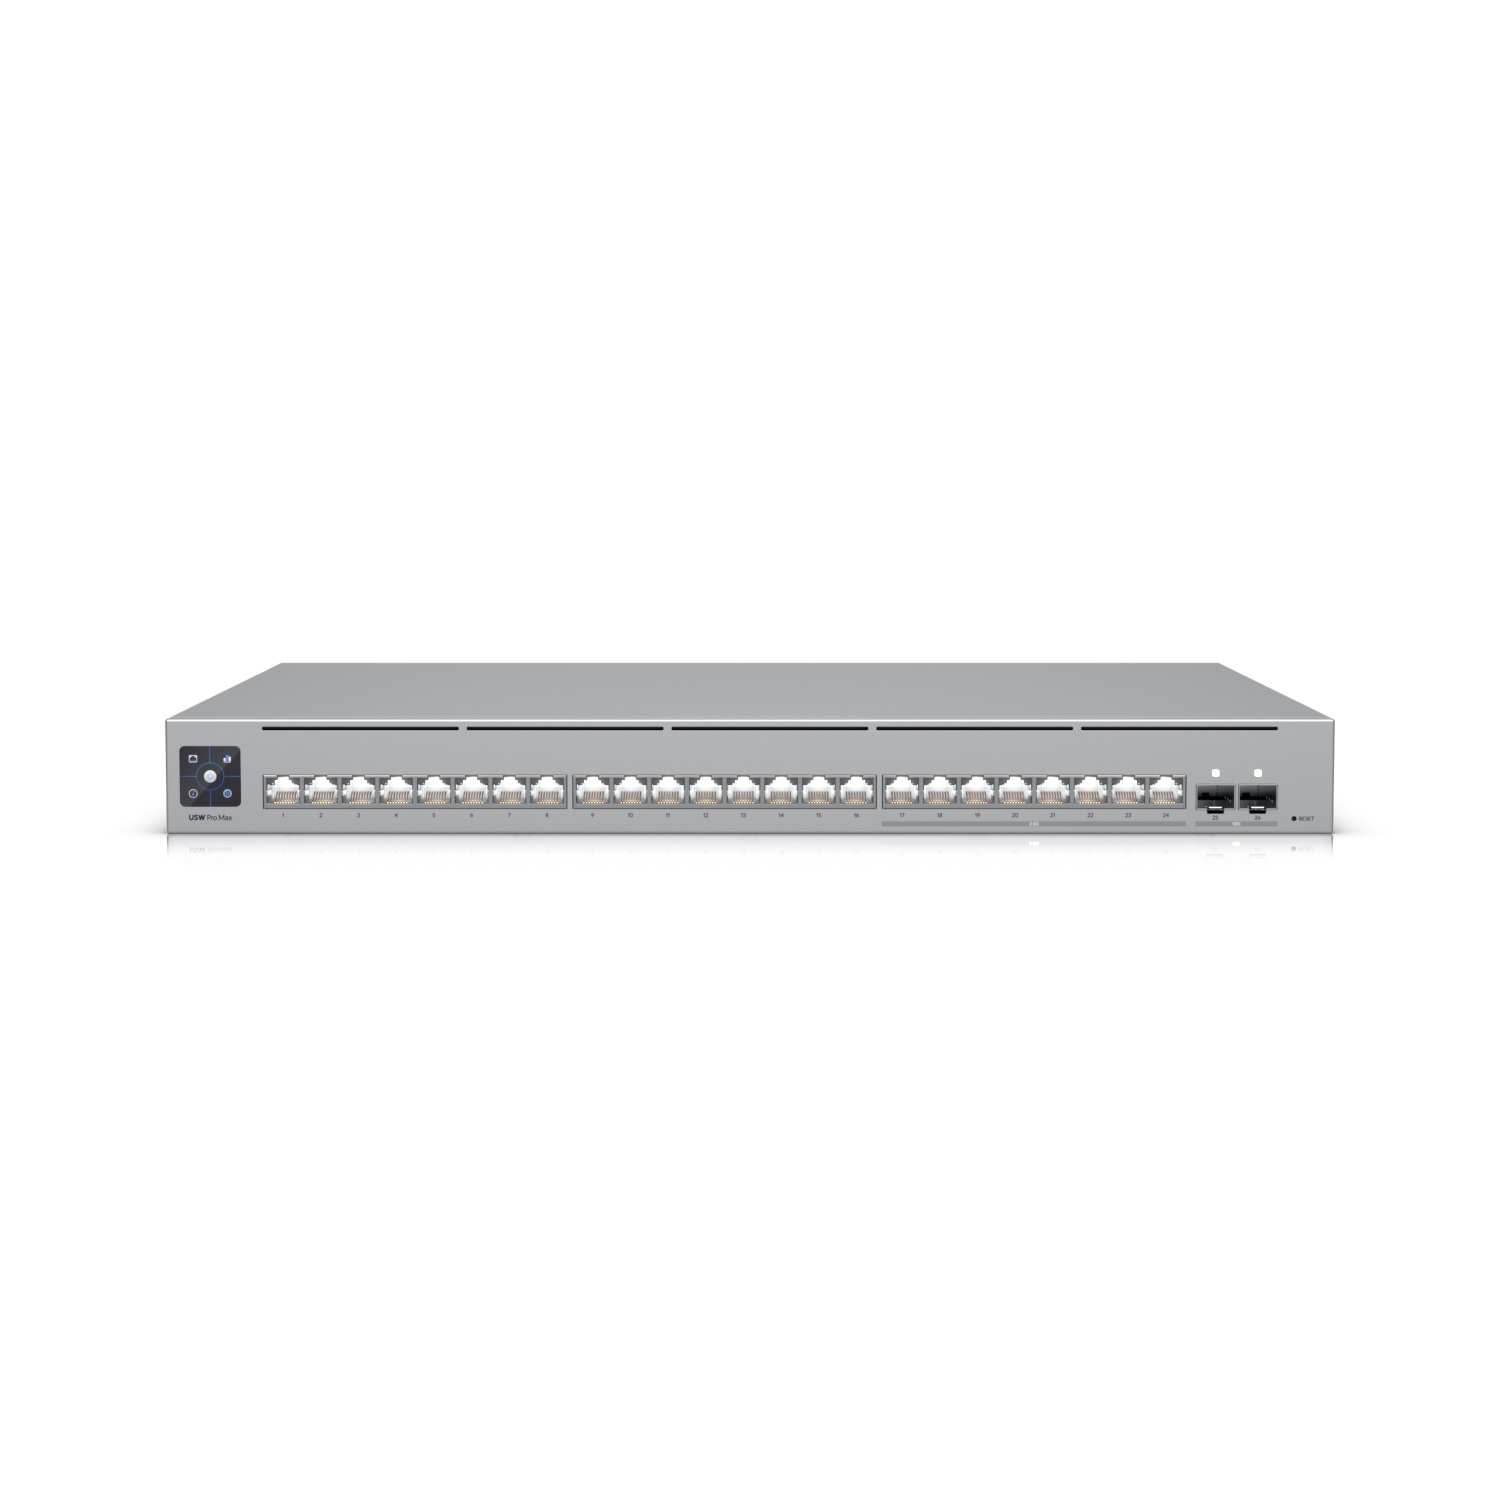 Ubiquiti - A 24-port, Layer 3 Etherlighting™ switch with 2.5 GbE